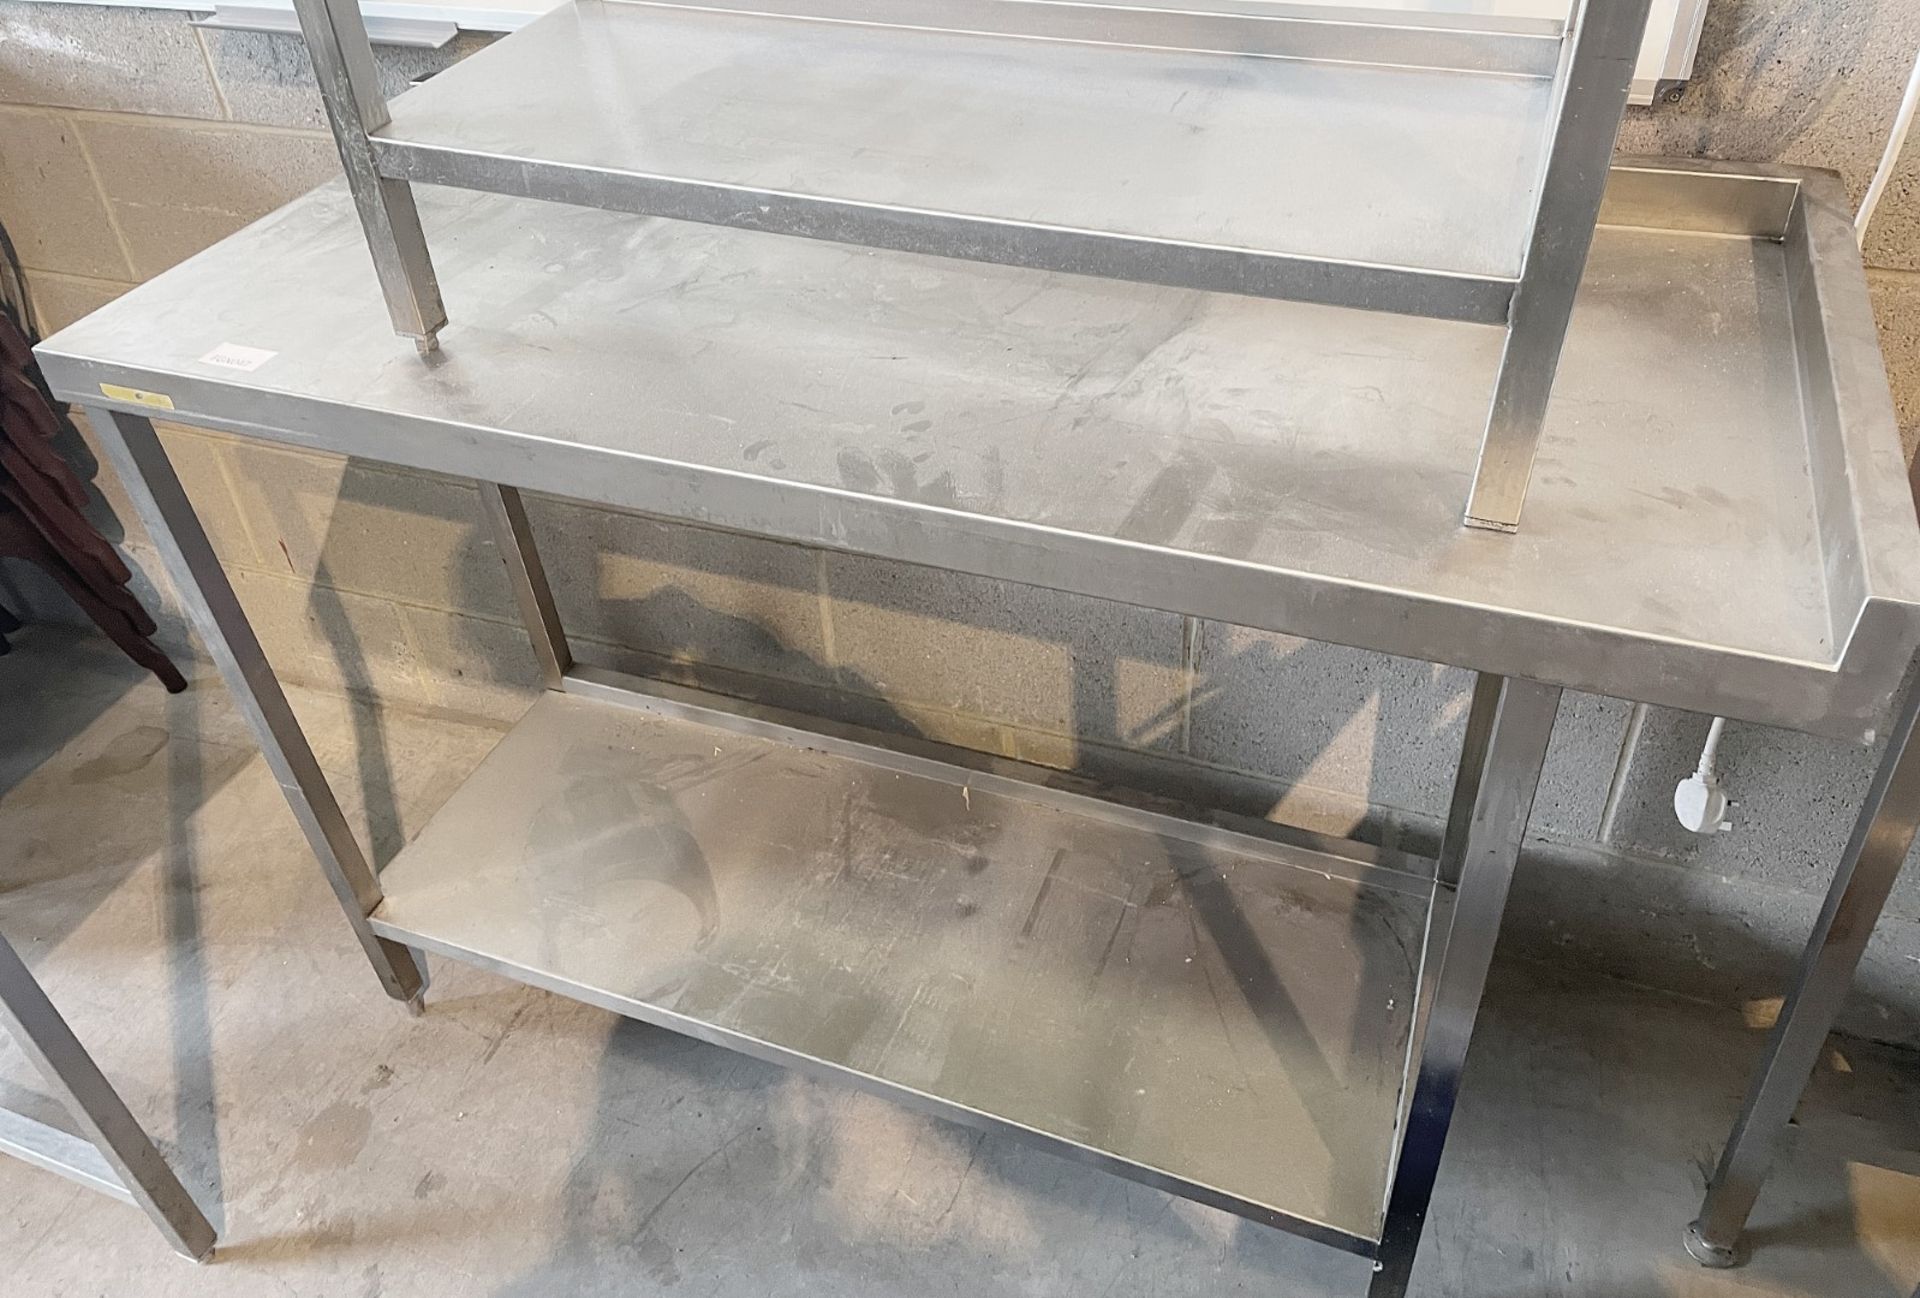 1 x Stainless Steel Prep Table, With Upstand and Undershelf - Approx 130 x 53 x 92Cm - Ref: FGN047 - - Image 3 of 3